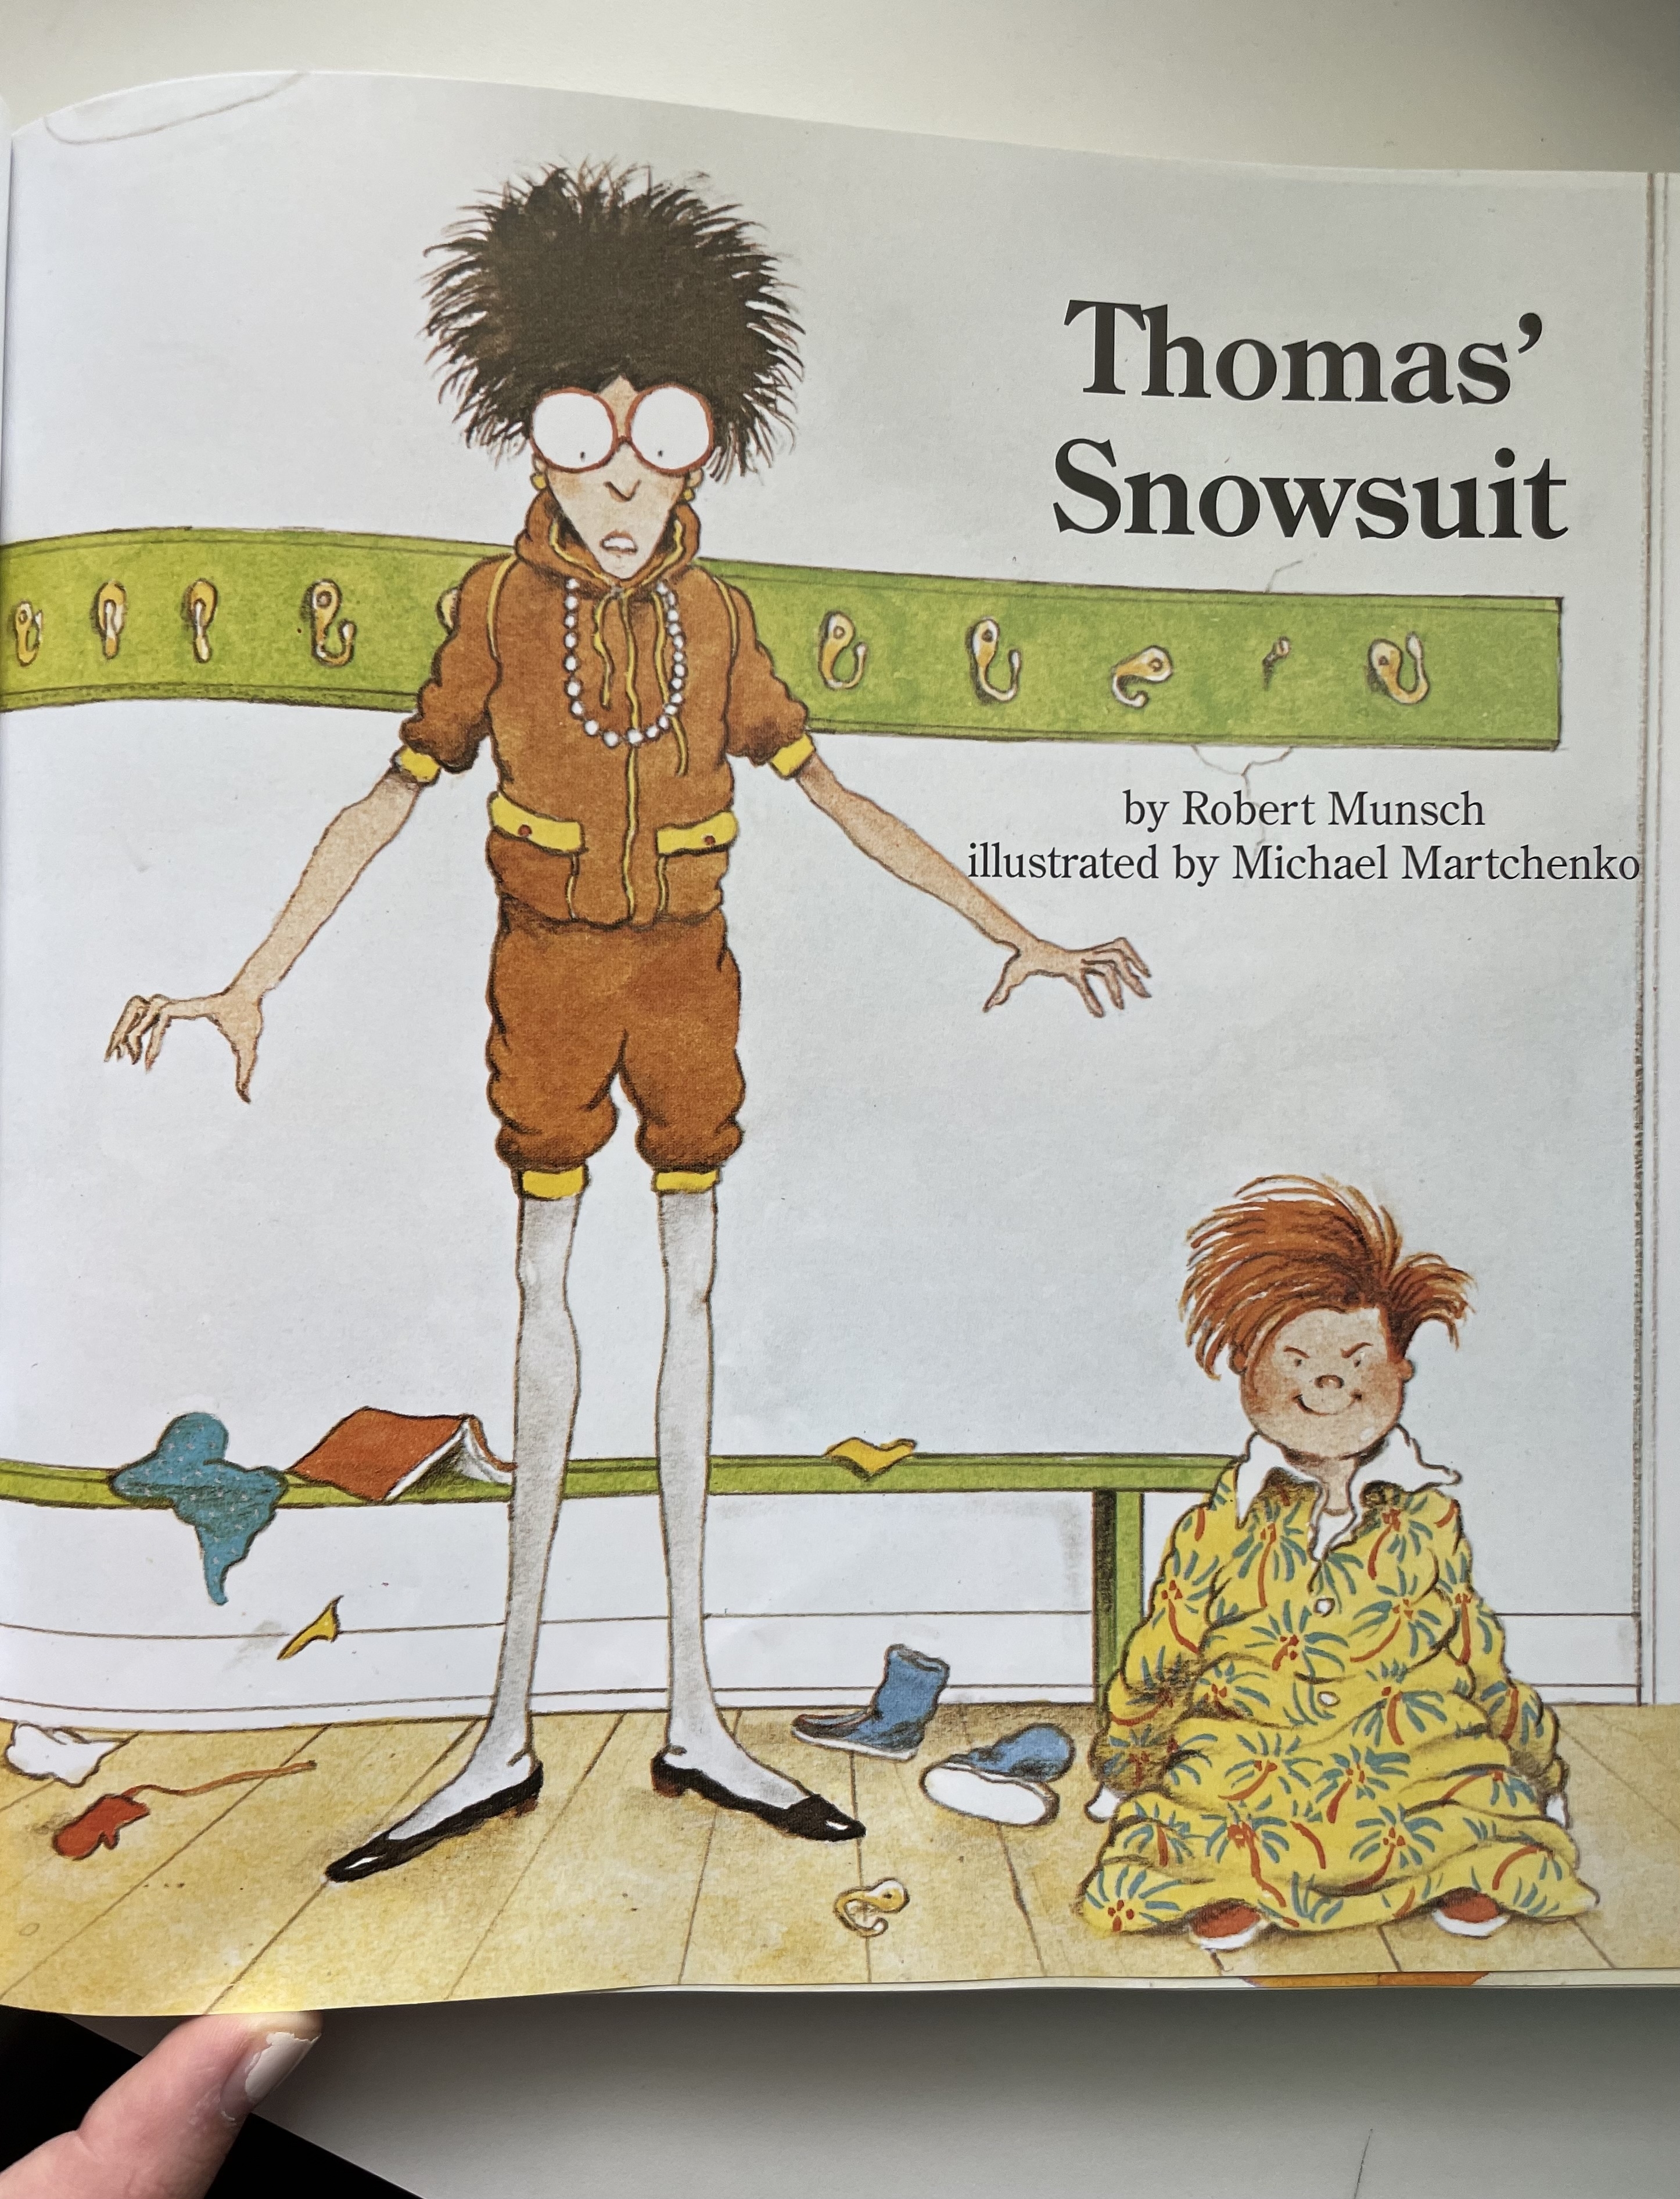 Illustration from &quot;Thomas&#x27; Snowsuit&quot; showing a child in a mismatched outfit and a smaller child looking on